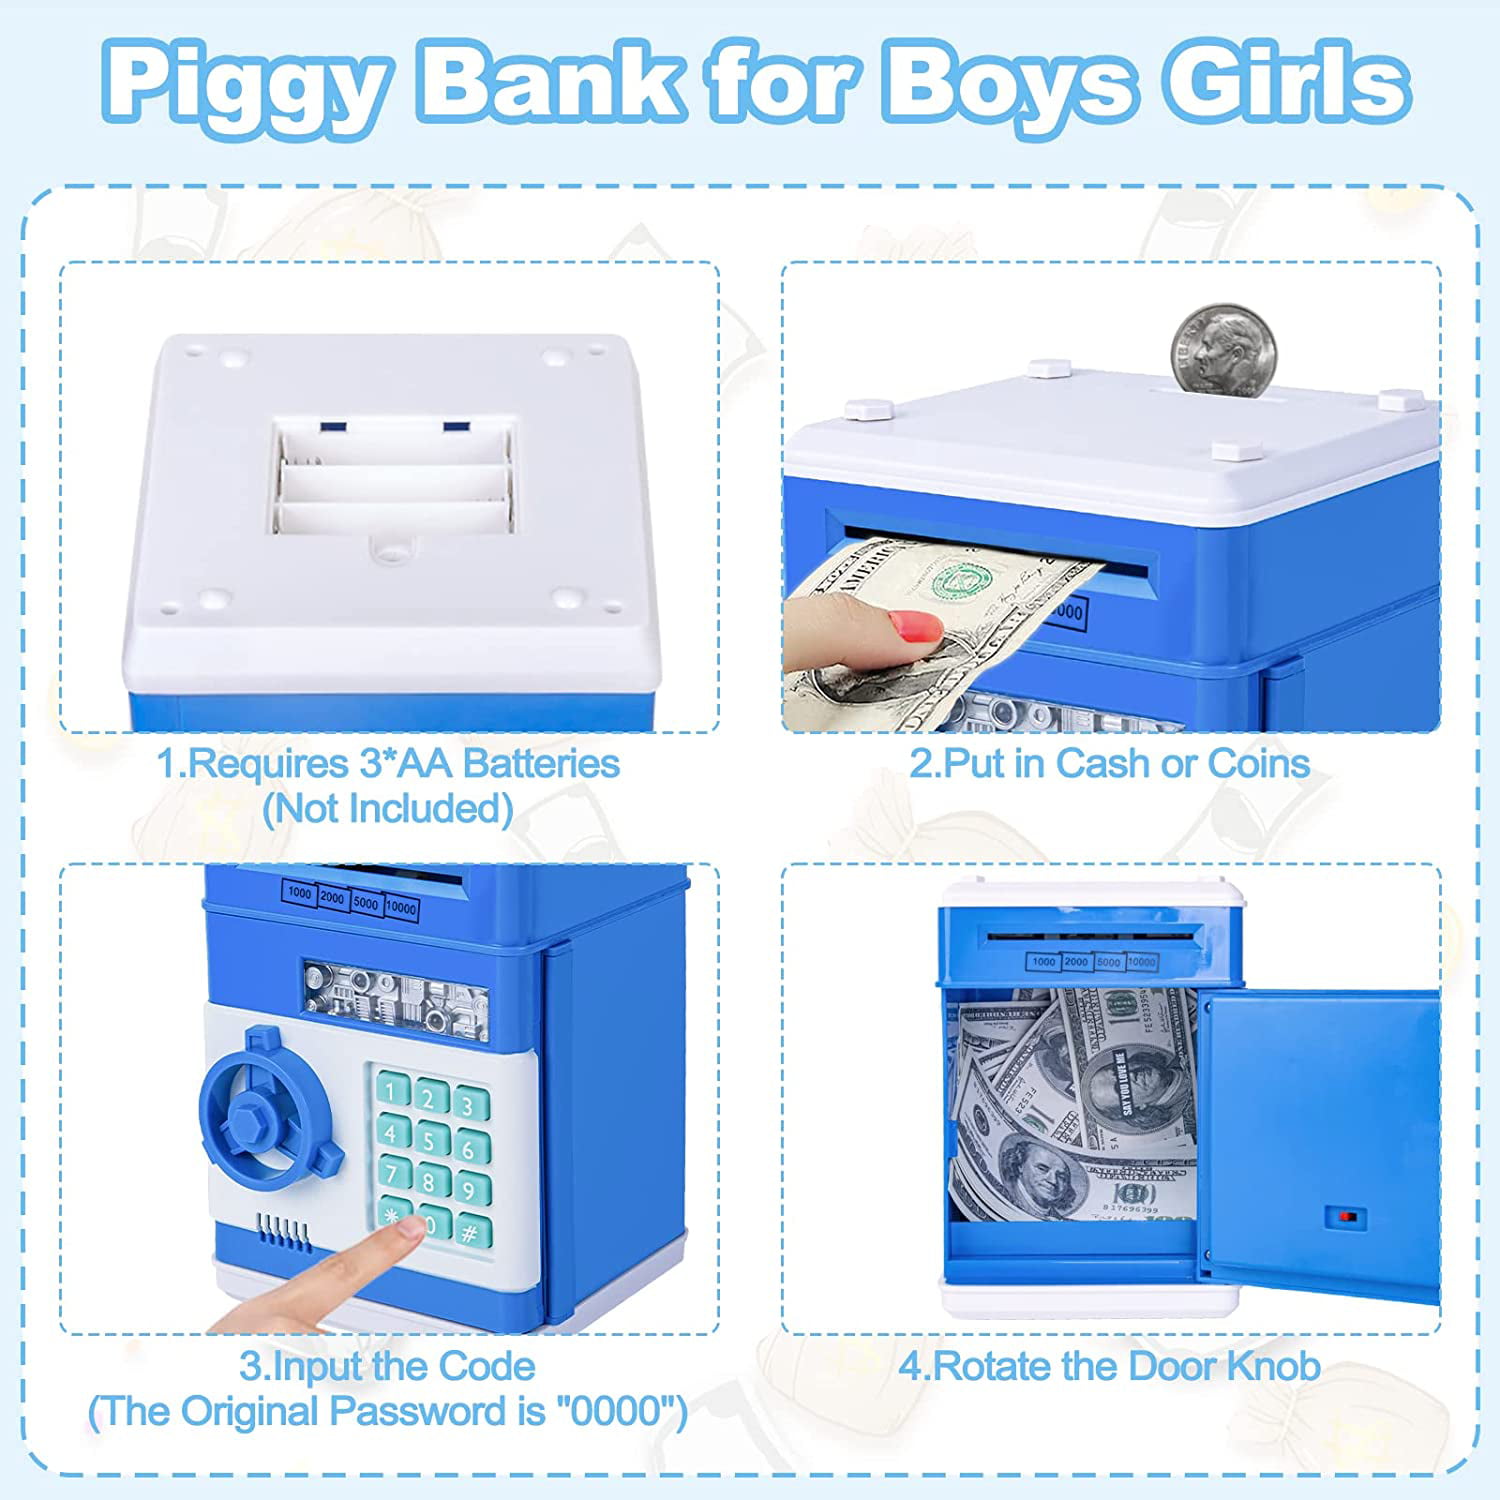 Refasy Kids Toys for Boys Girls Age 3-5,Electronic Piggy Banks for